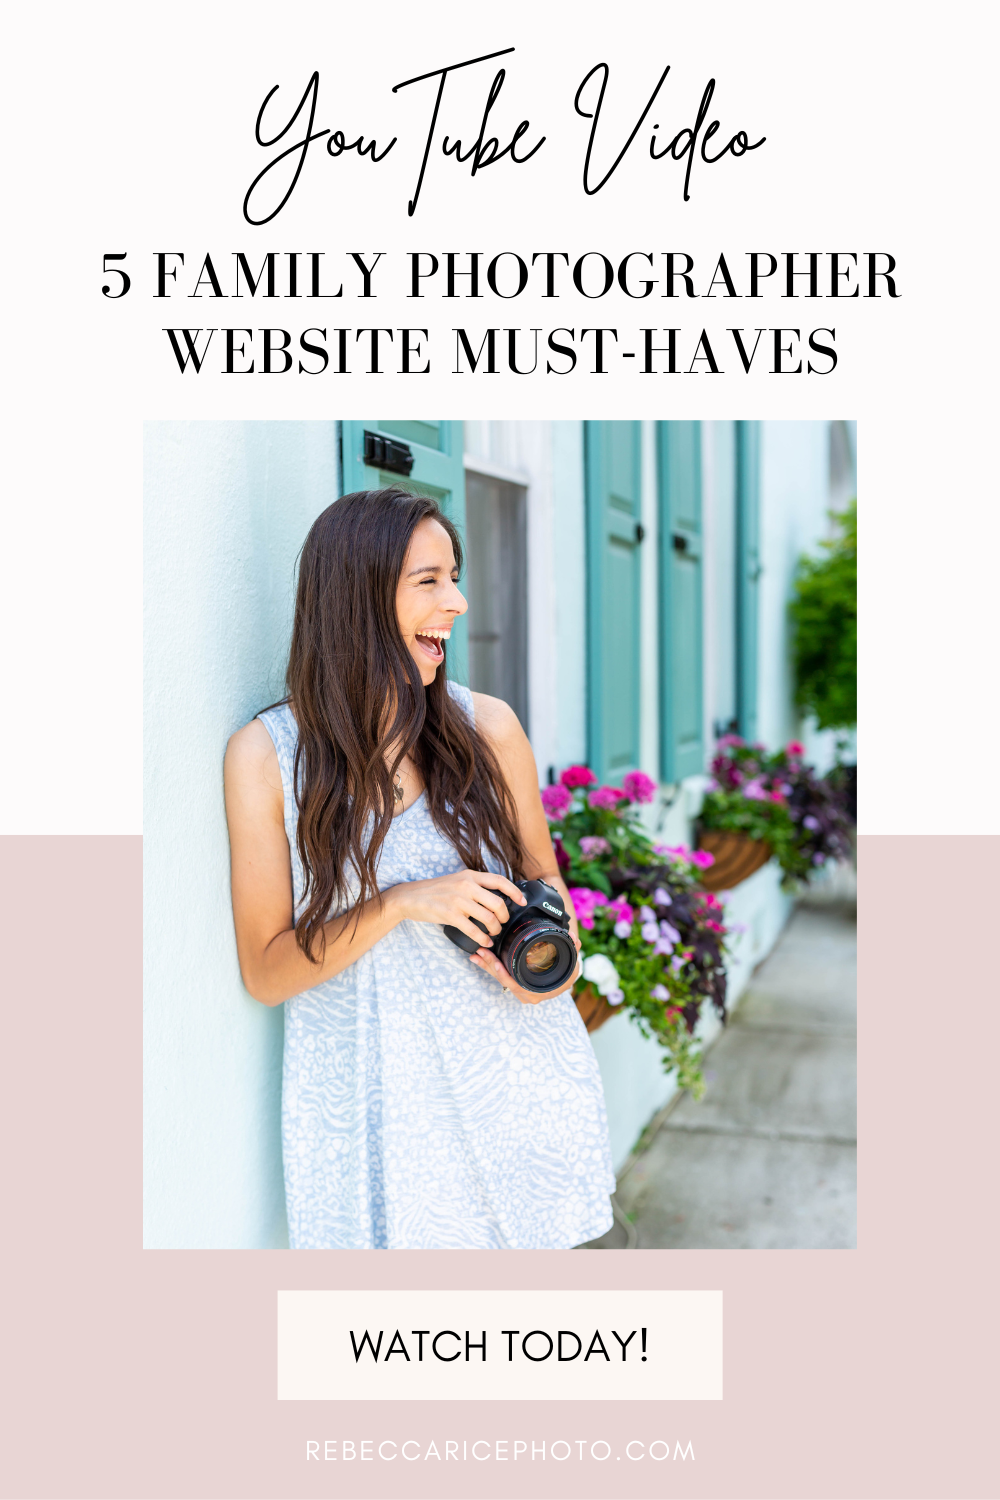 5 Family Photographer Website Must-Haves